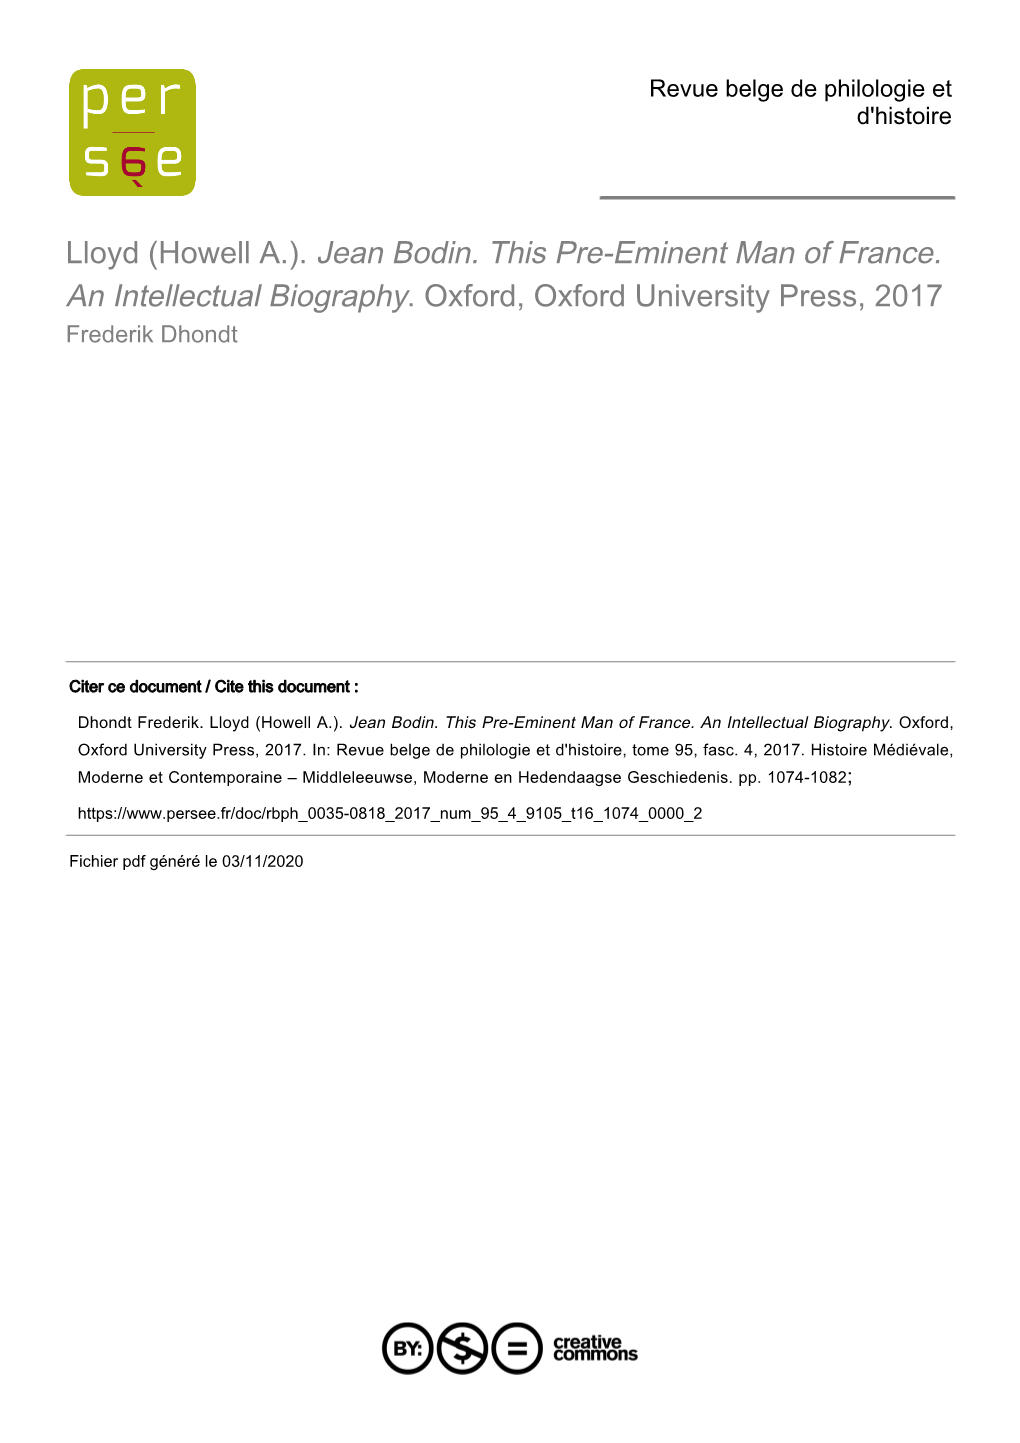 Lloyd (Howell A.). Jean Bodin. This Pre-Eminent Man of France. an Intellectual Biography